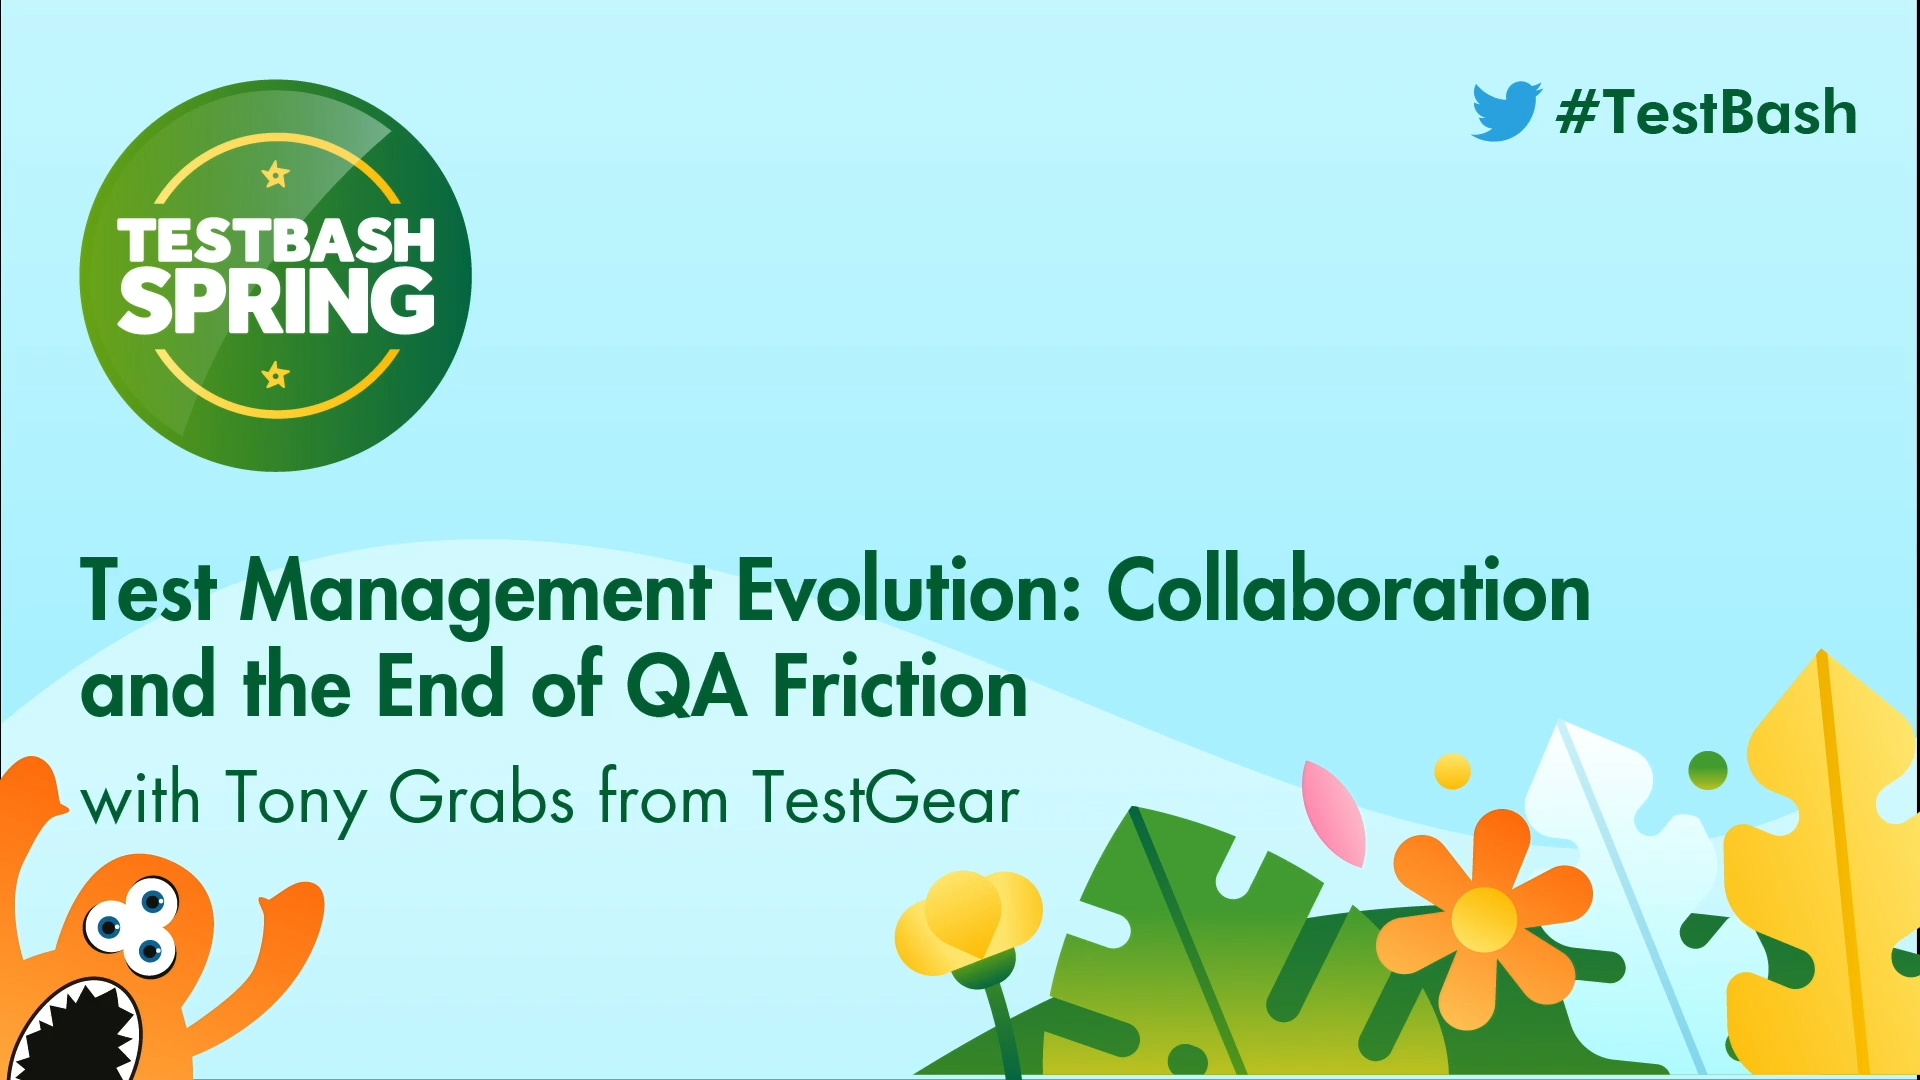 Test Management Evolution: Collaboration and the End of QA Friction